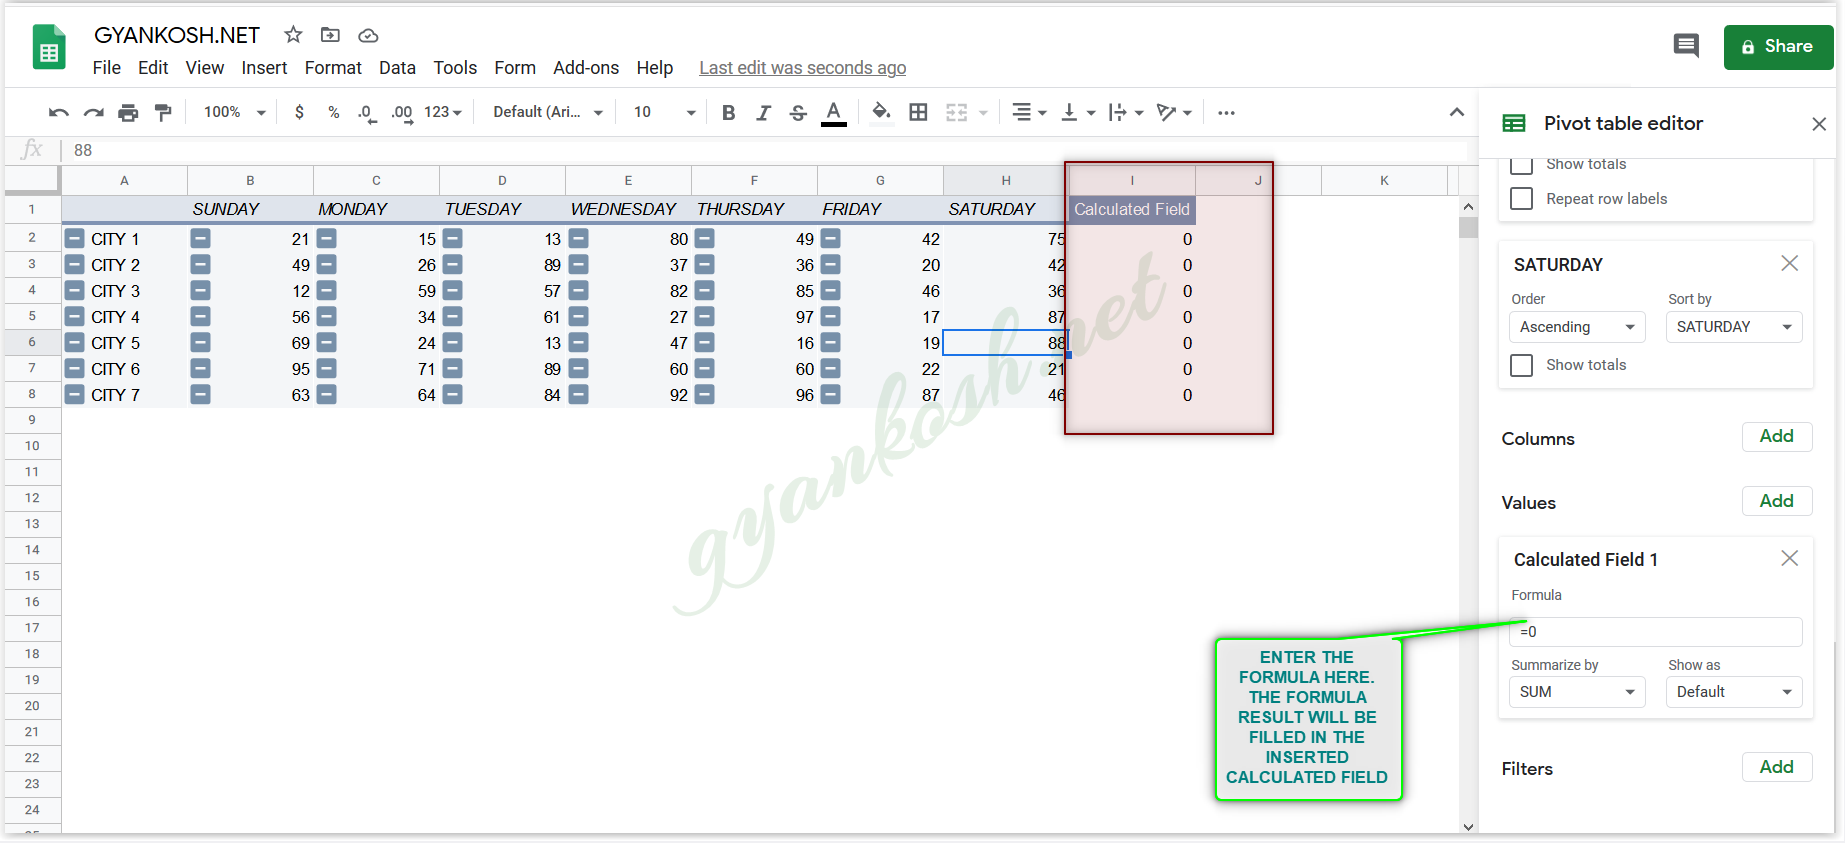 How To Insert A Calculated Field In Pivot Table Using Google Sheets